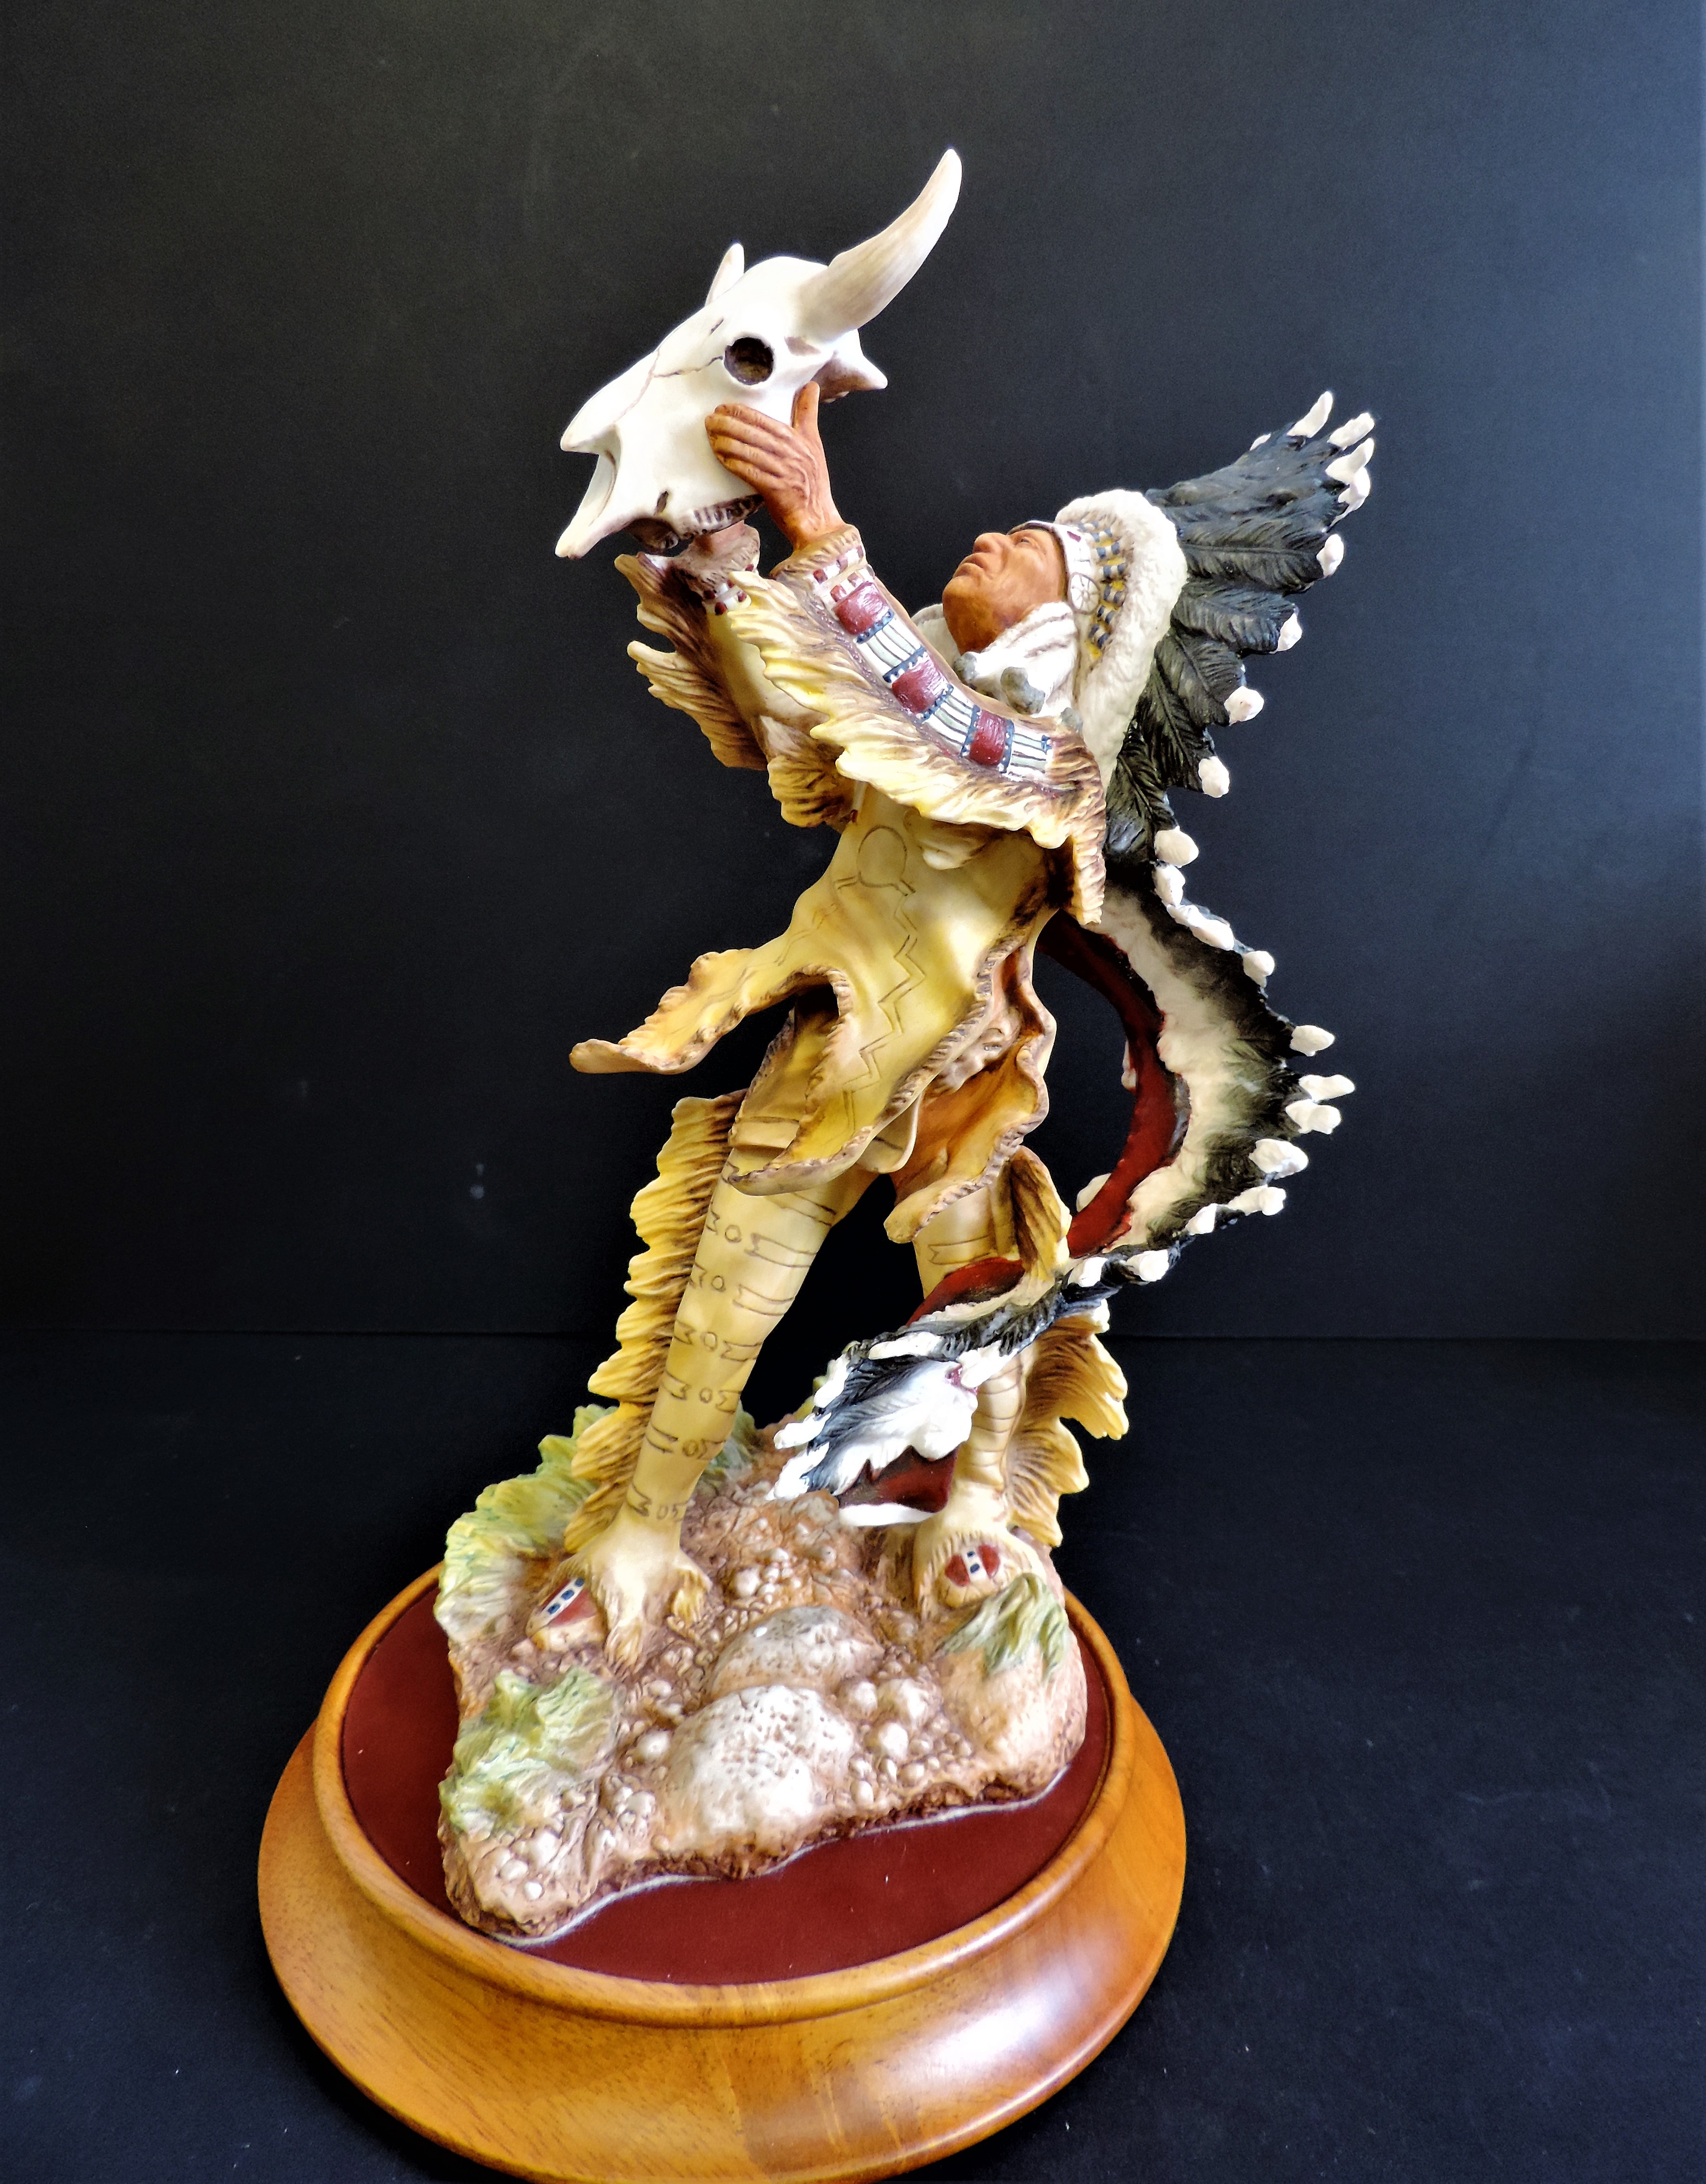 Franklin Mint Prayer to the Great Spirit Porcelain Sculpture - Very Rare - Image 5 of 8